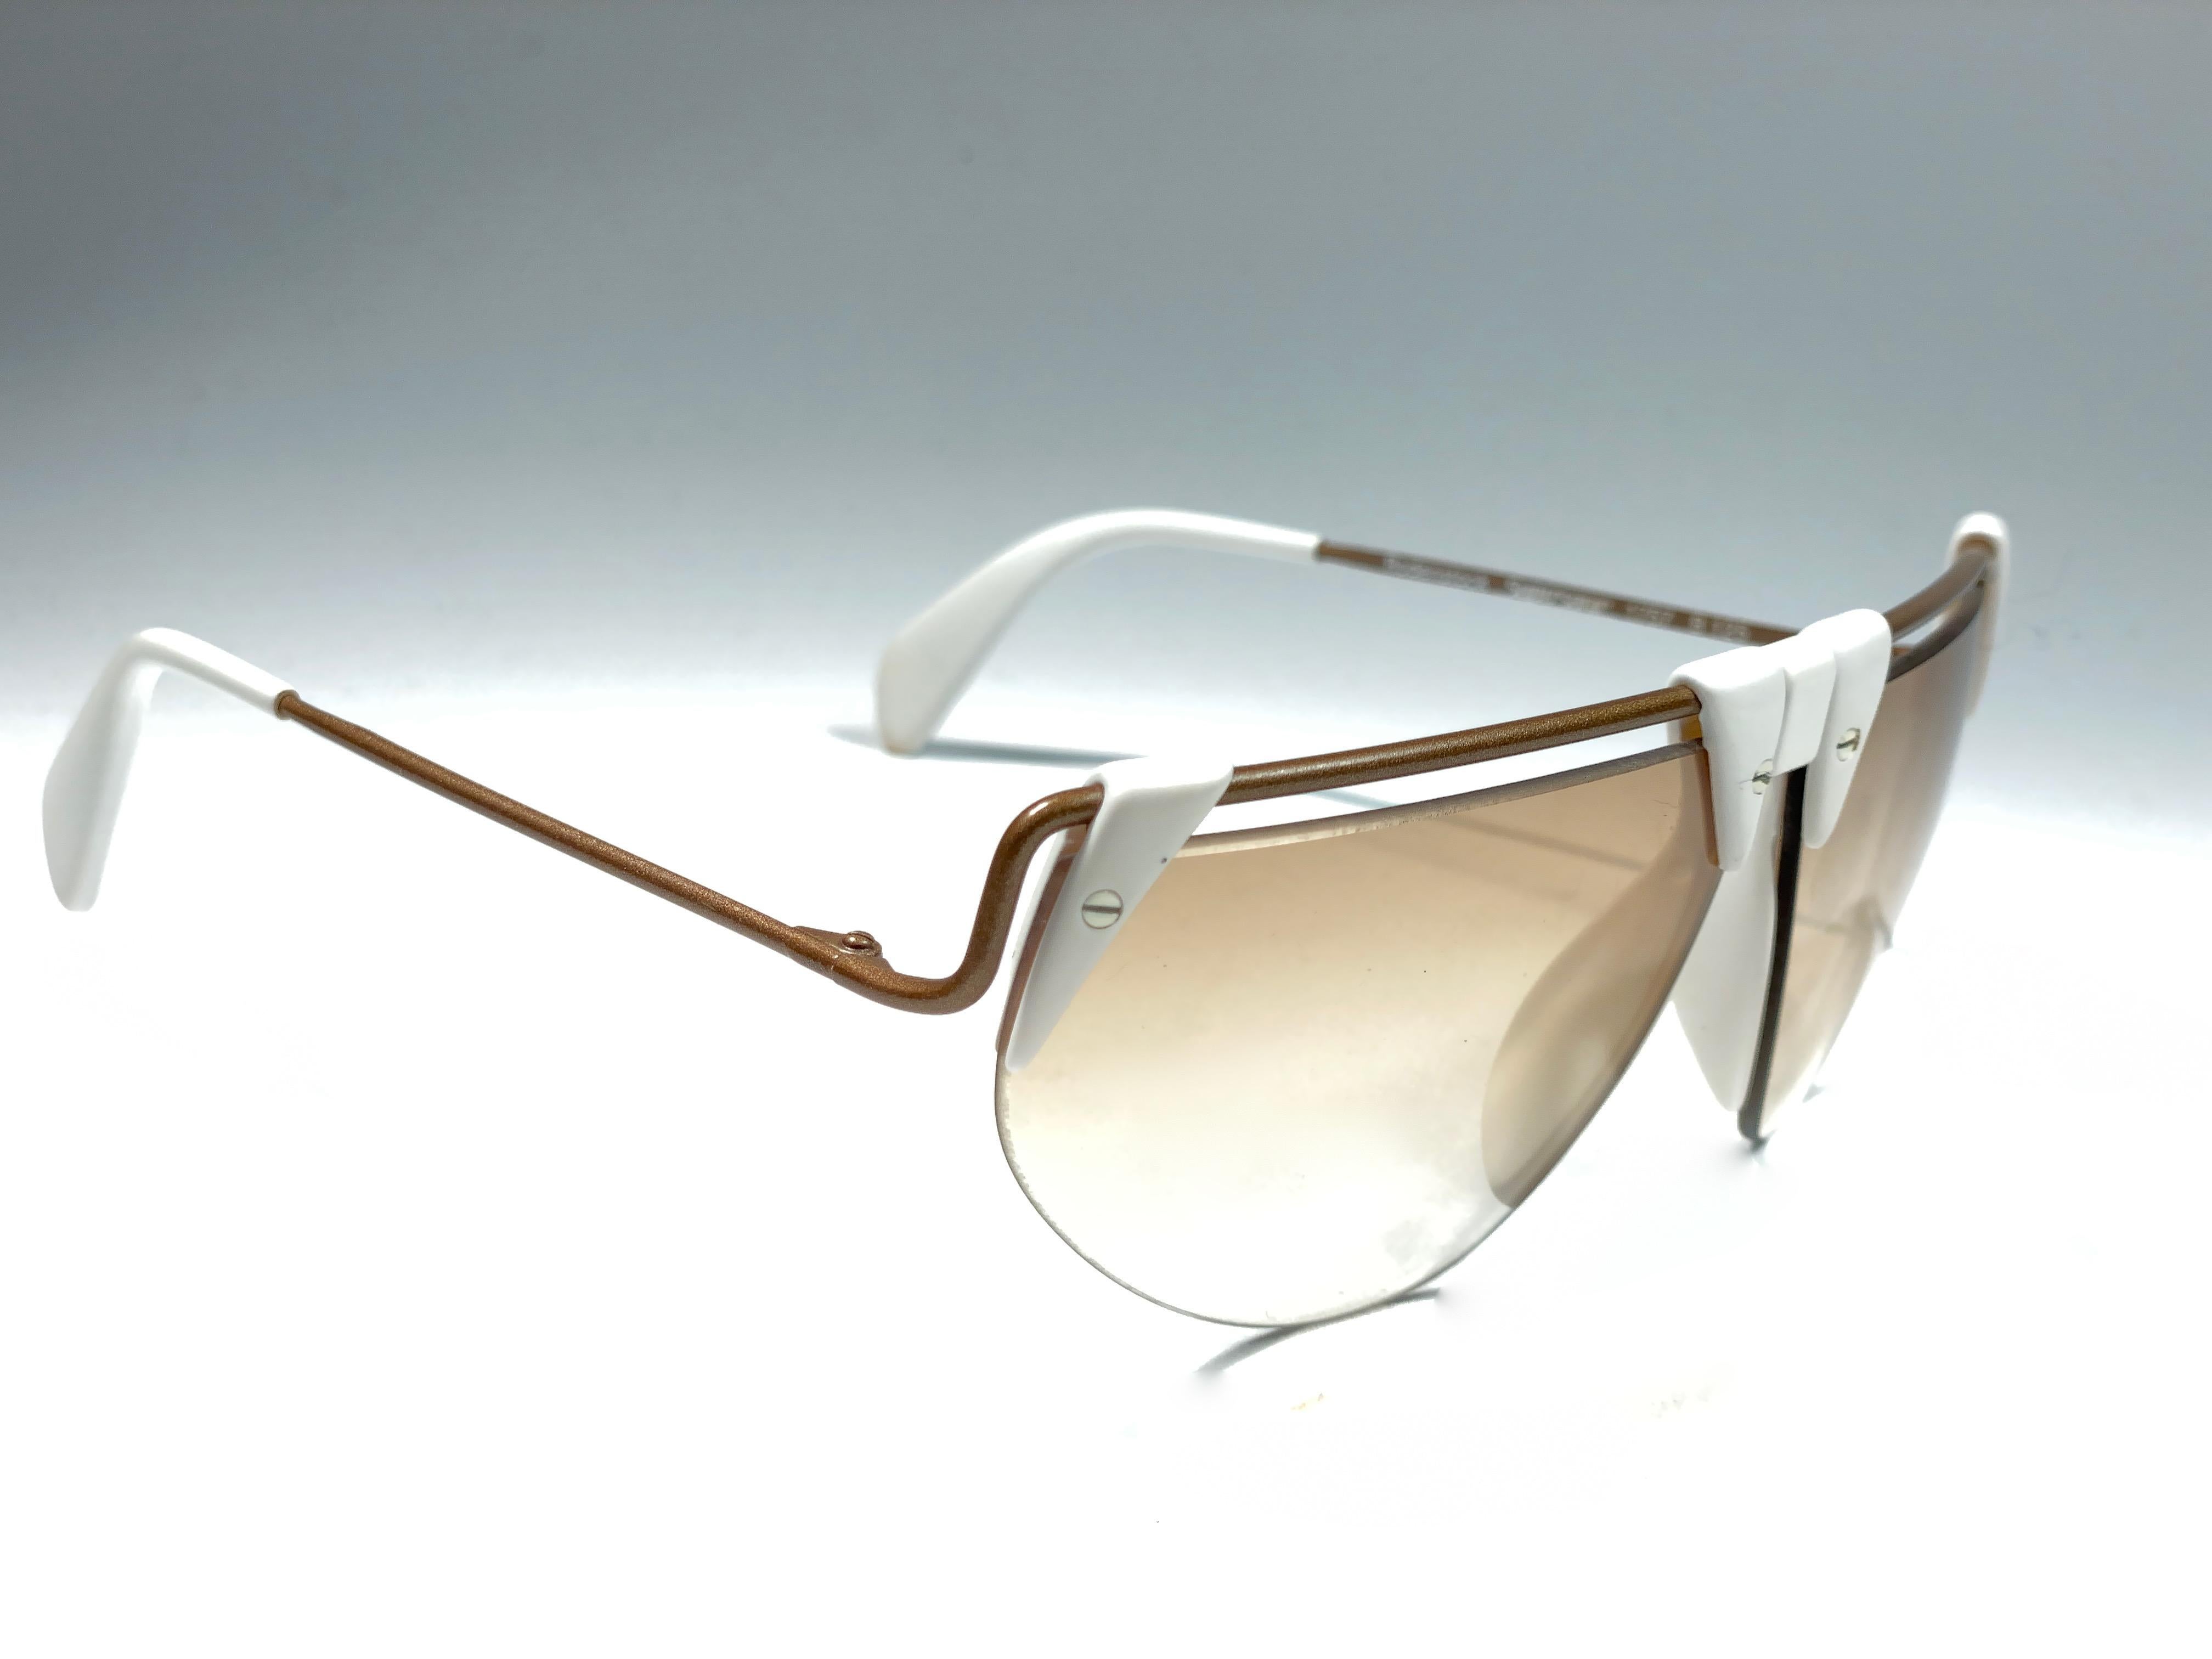 New Vintage Rodenstock sunglasses.  

Polar white accents frame sporting a pair light gradient lenses.  Never worn or displayed. 
This item show minor sign of wear due to nearly 40 years of storage.  Designed and produced in Germany.